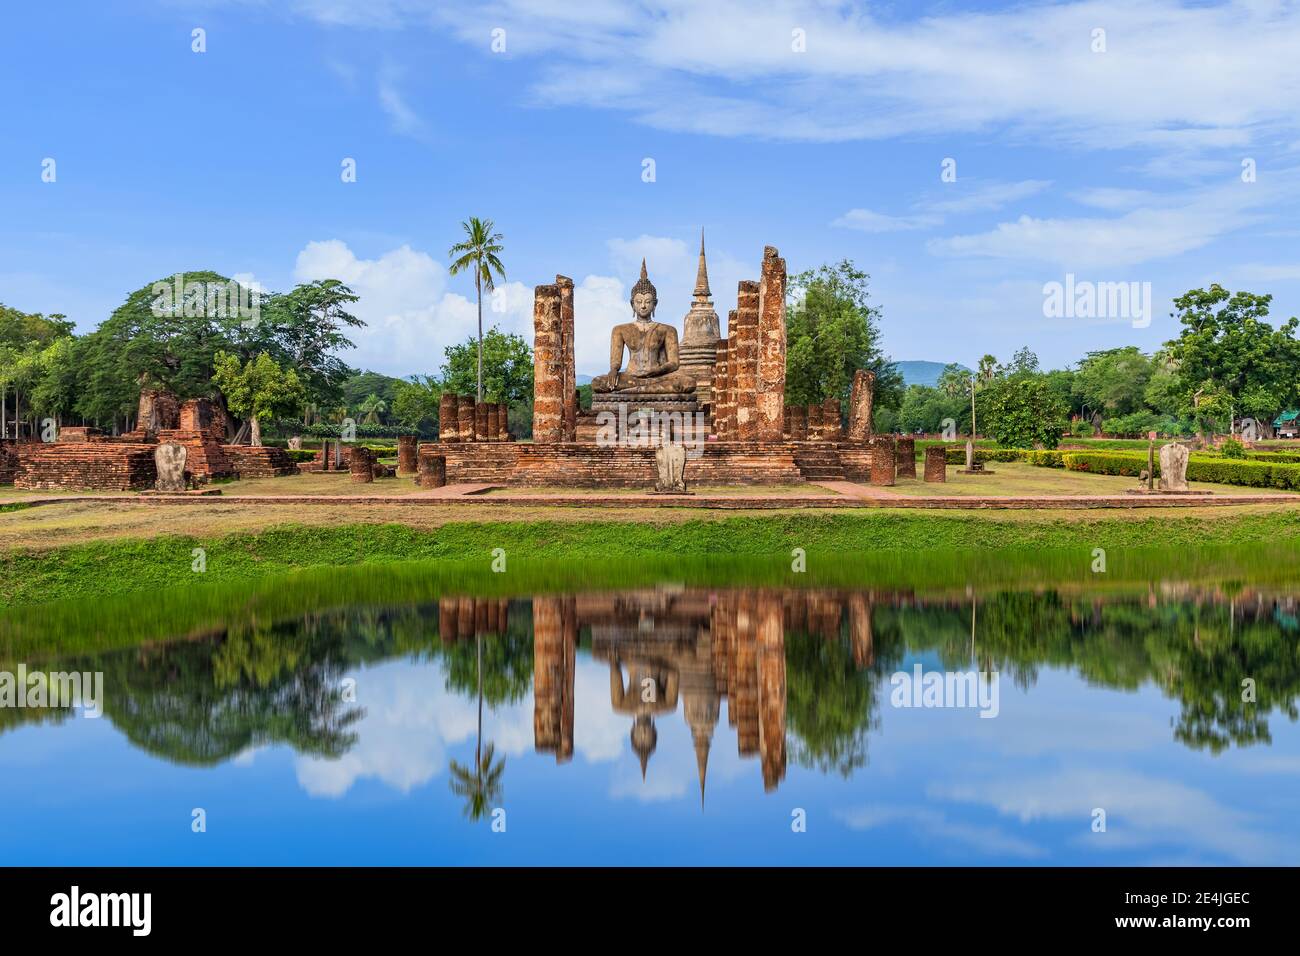 Buddha statue and Pagoda in ruined monastery complex at Wat Mahathat temple with reflection, Sukhothai Historical Park, Thailand Stock Photo